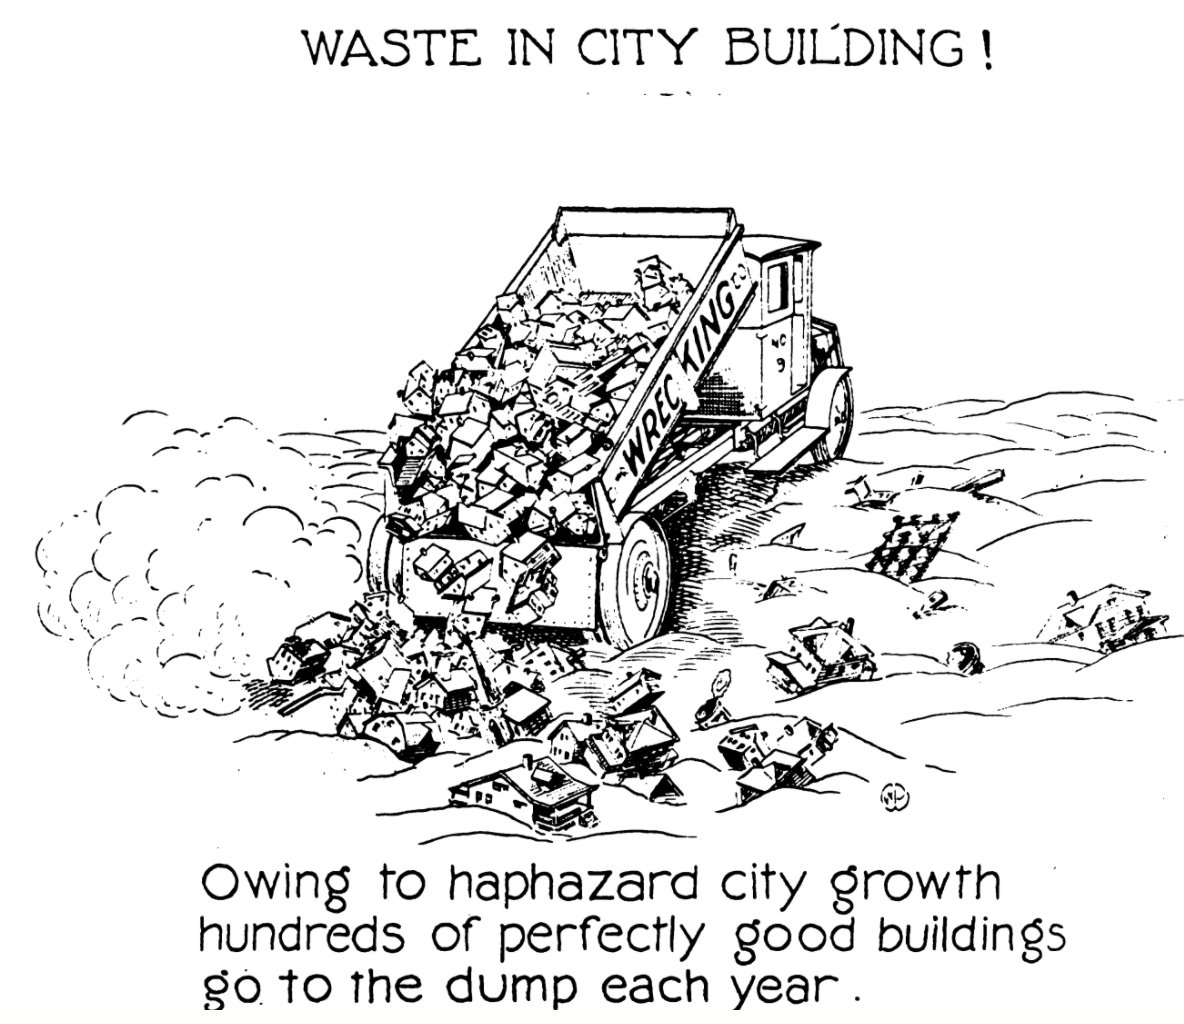 Without racial zoning, "perfectly good buildings" will "go to the dump"